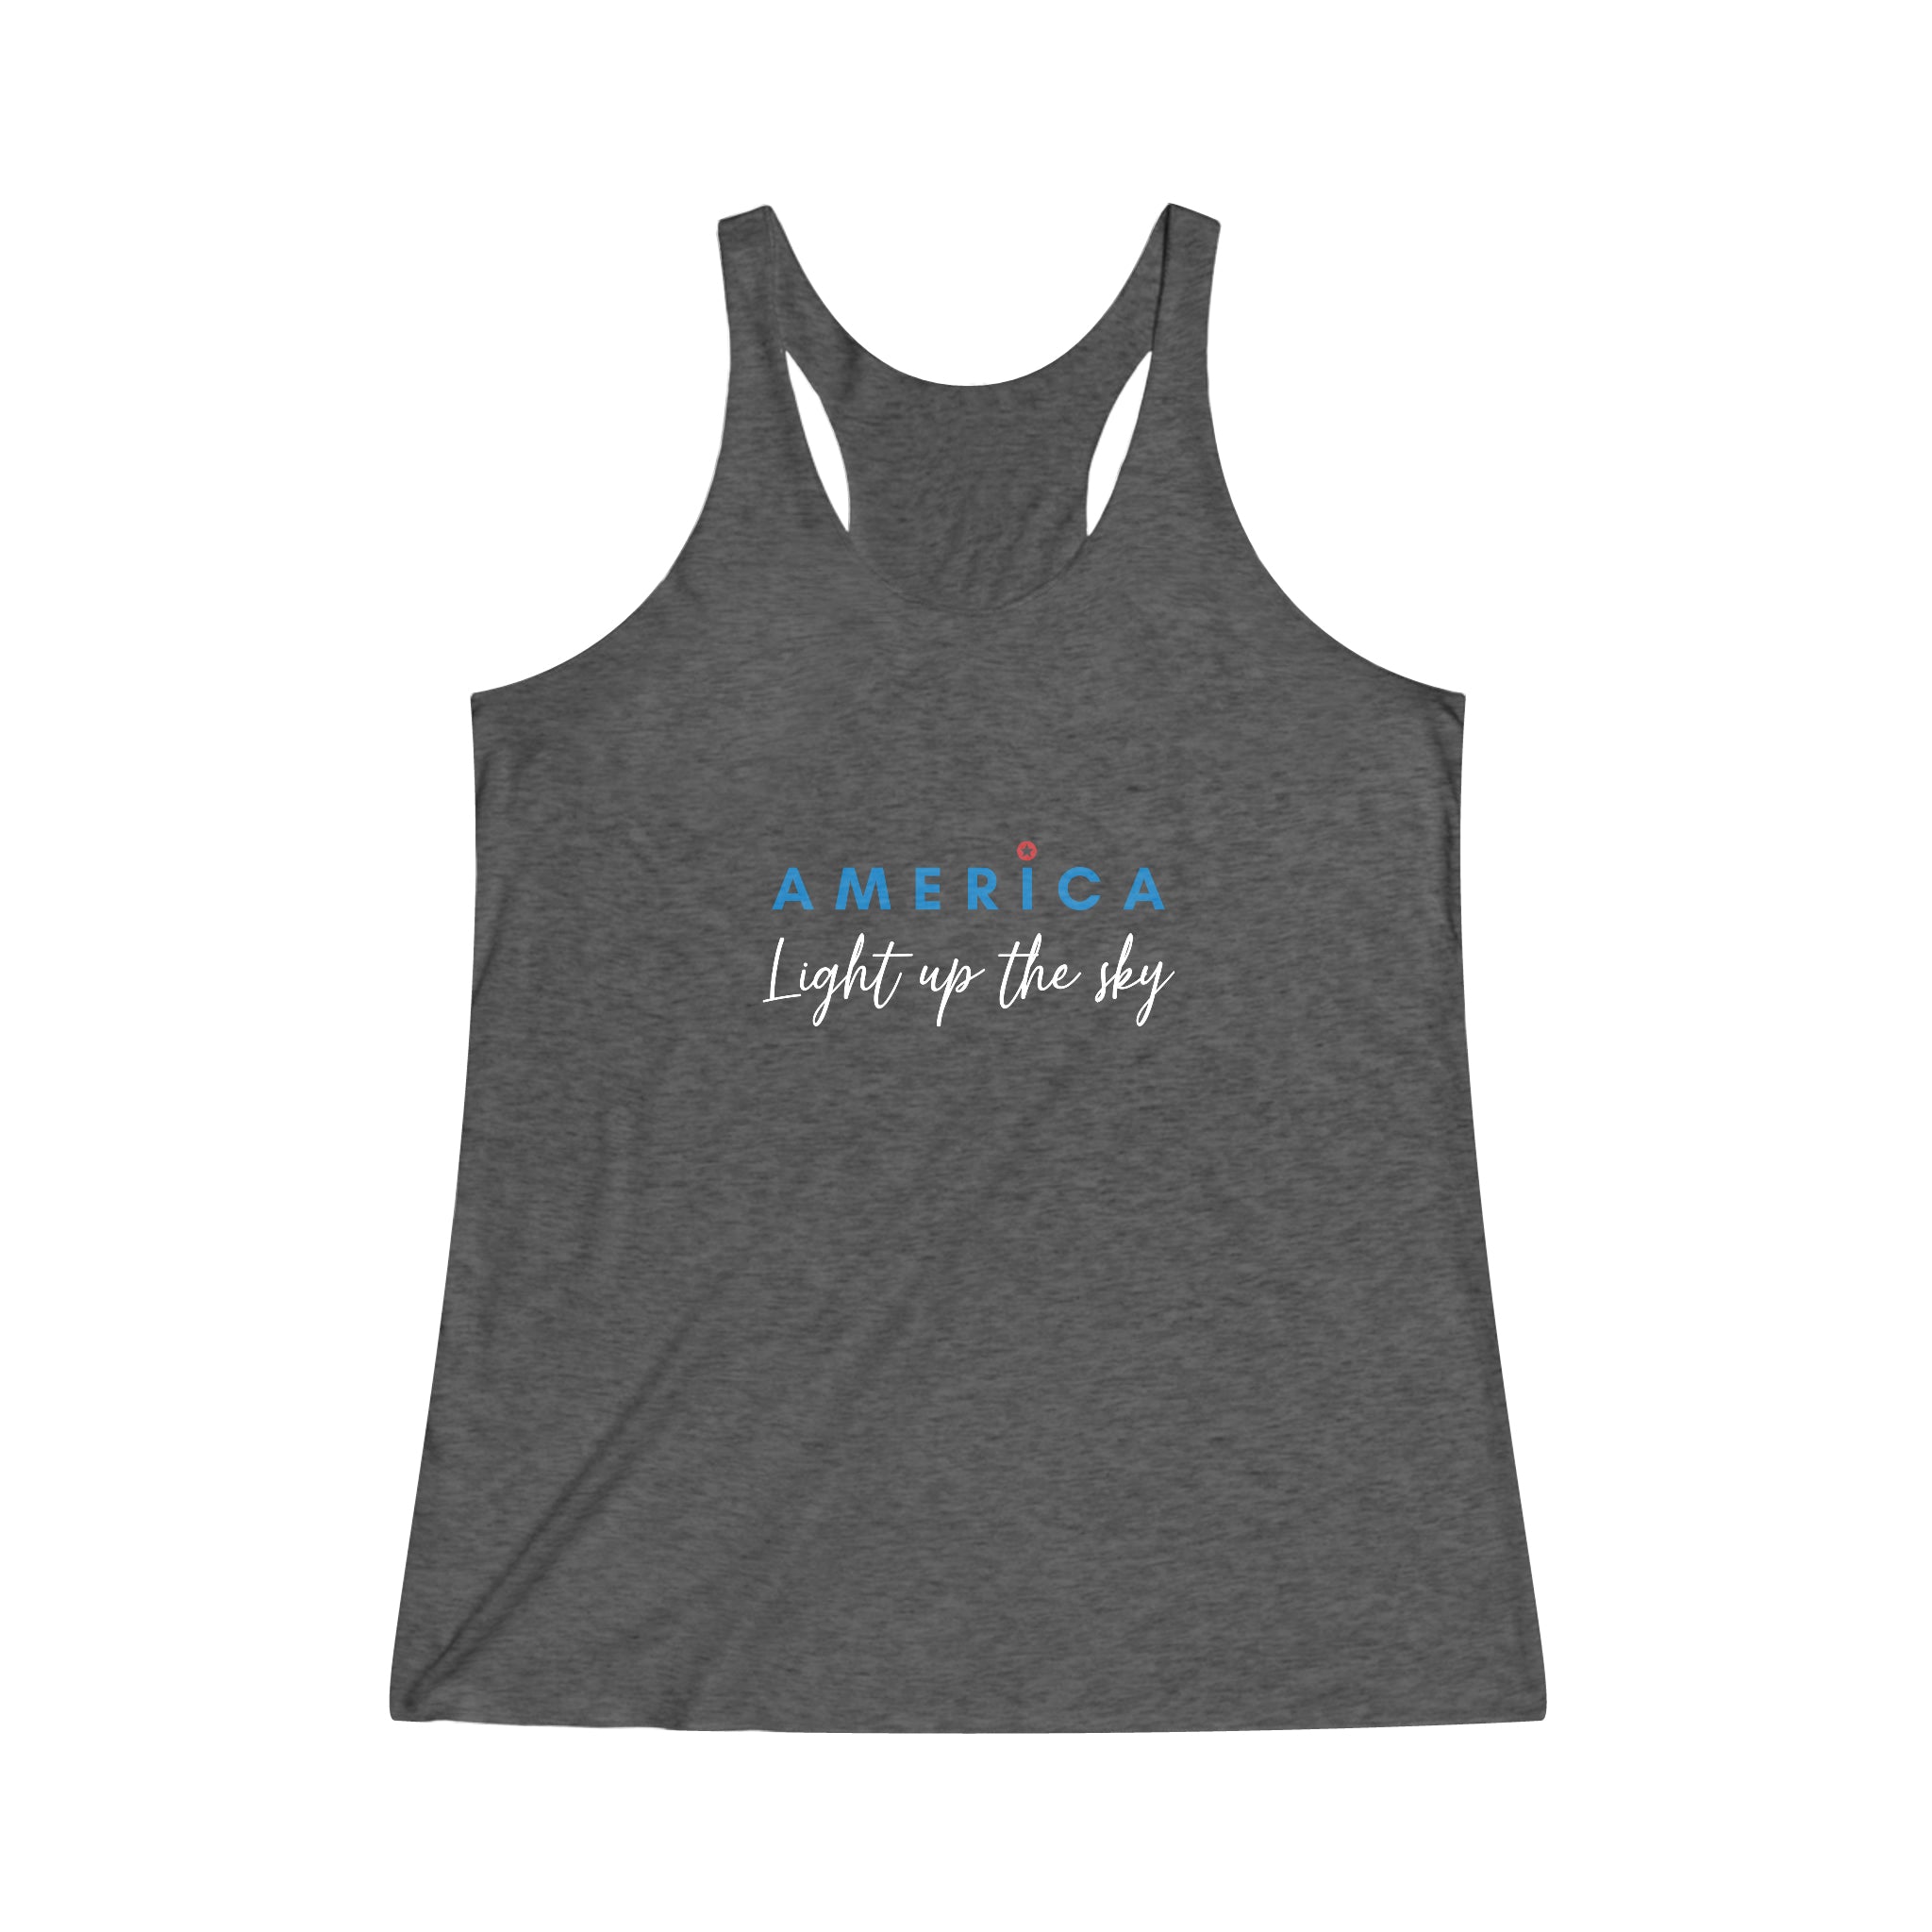 4th of July Tank Top for Women, America Light Up The Sky